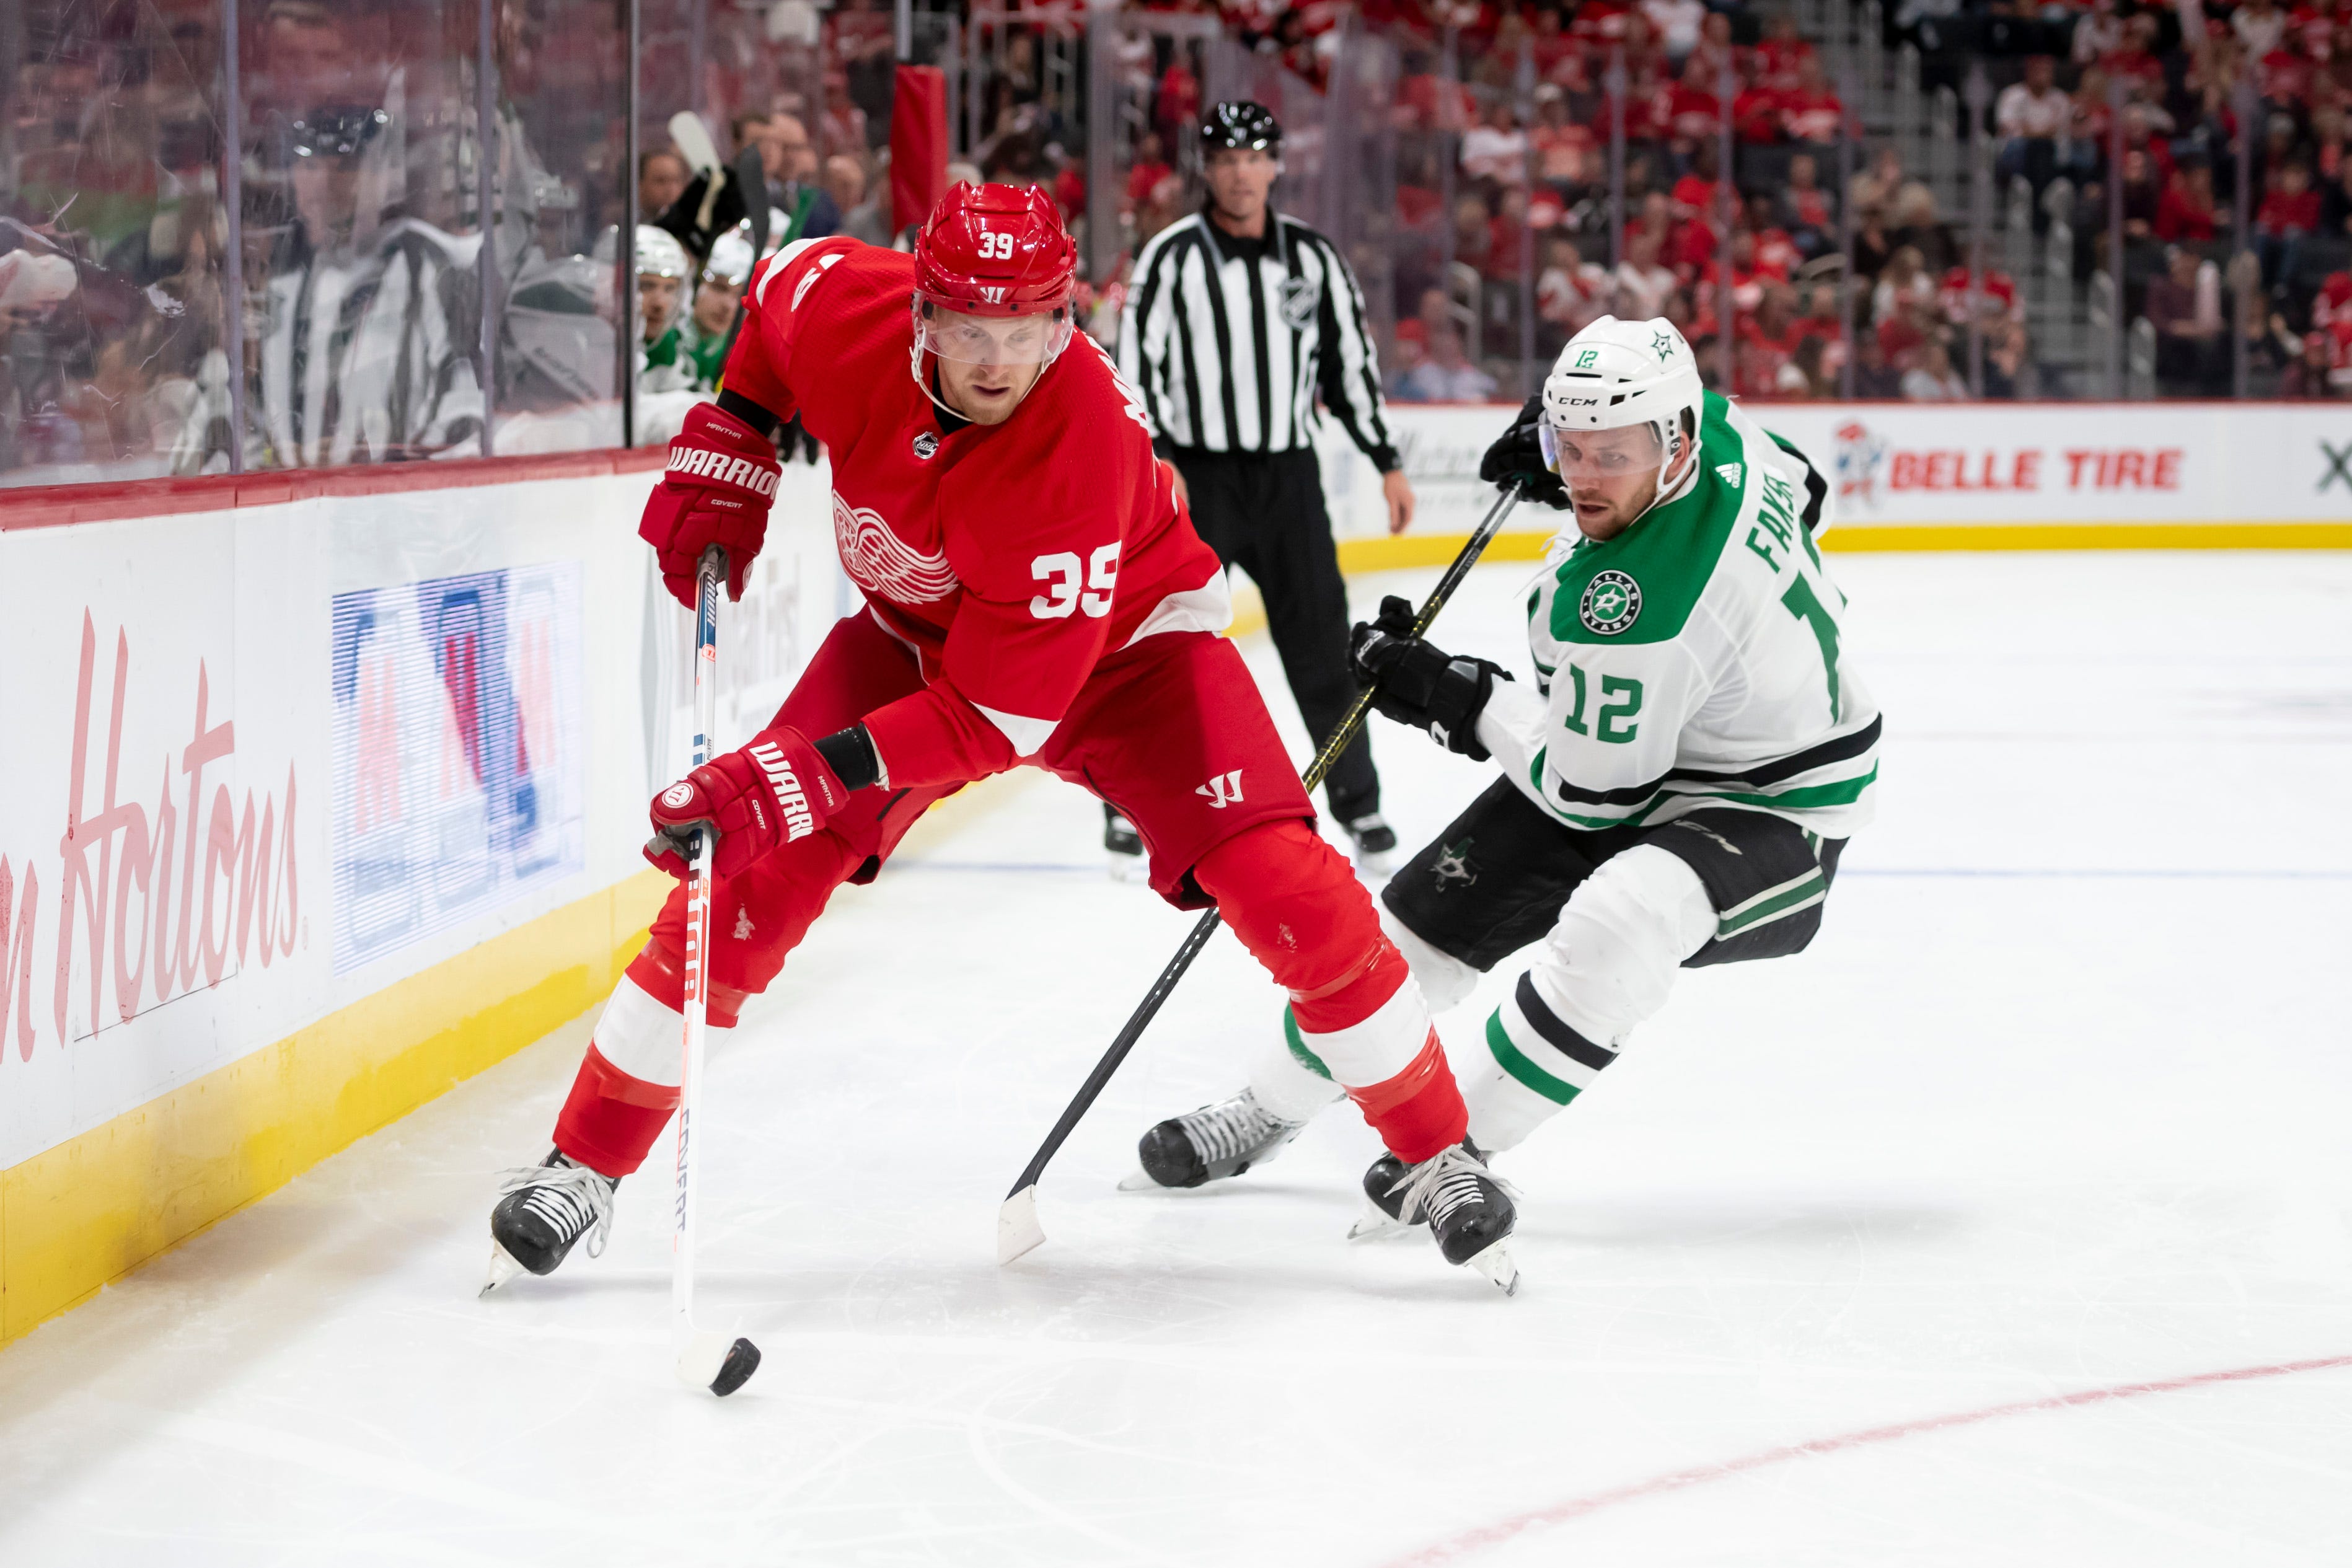 Detroit right wing Anthony Mantha keeps the puck away from Dallas center Radek Faksa in the third period.